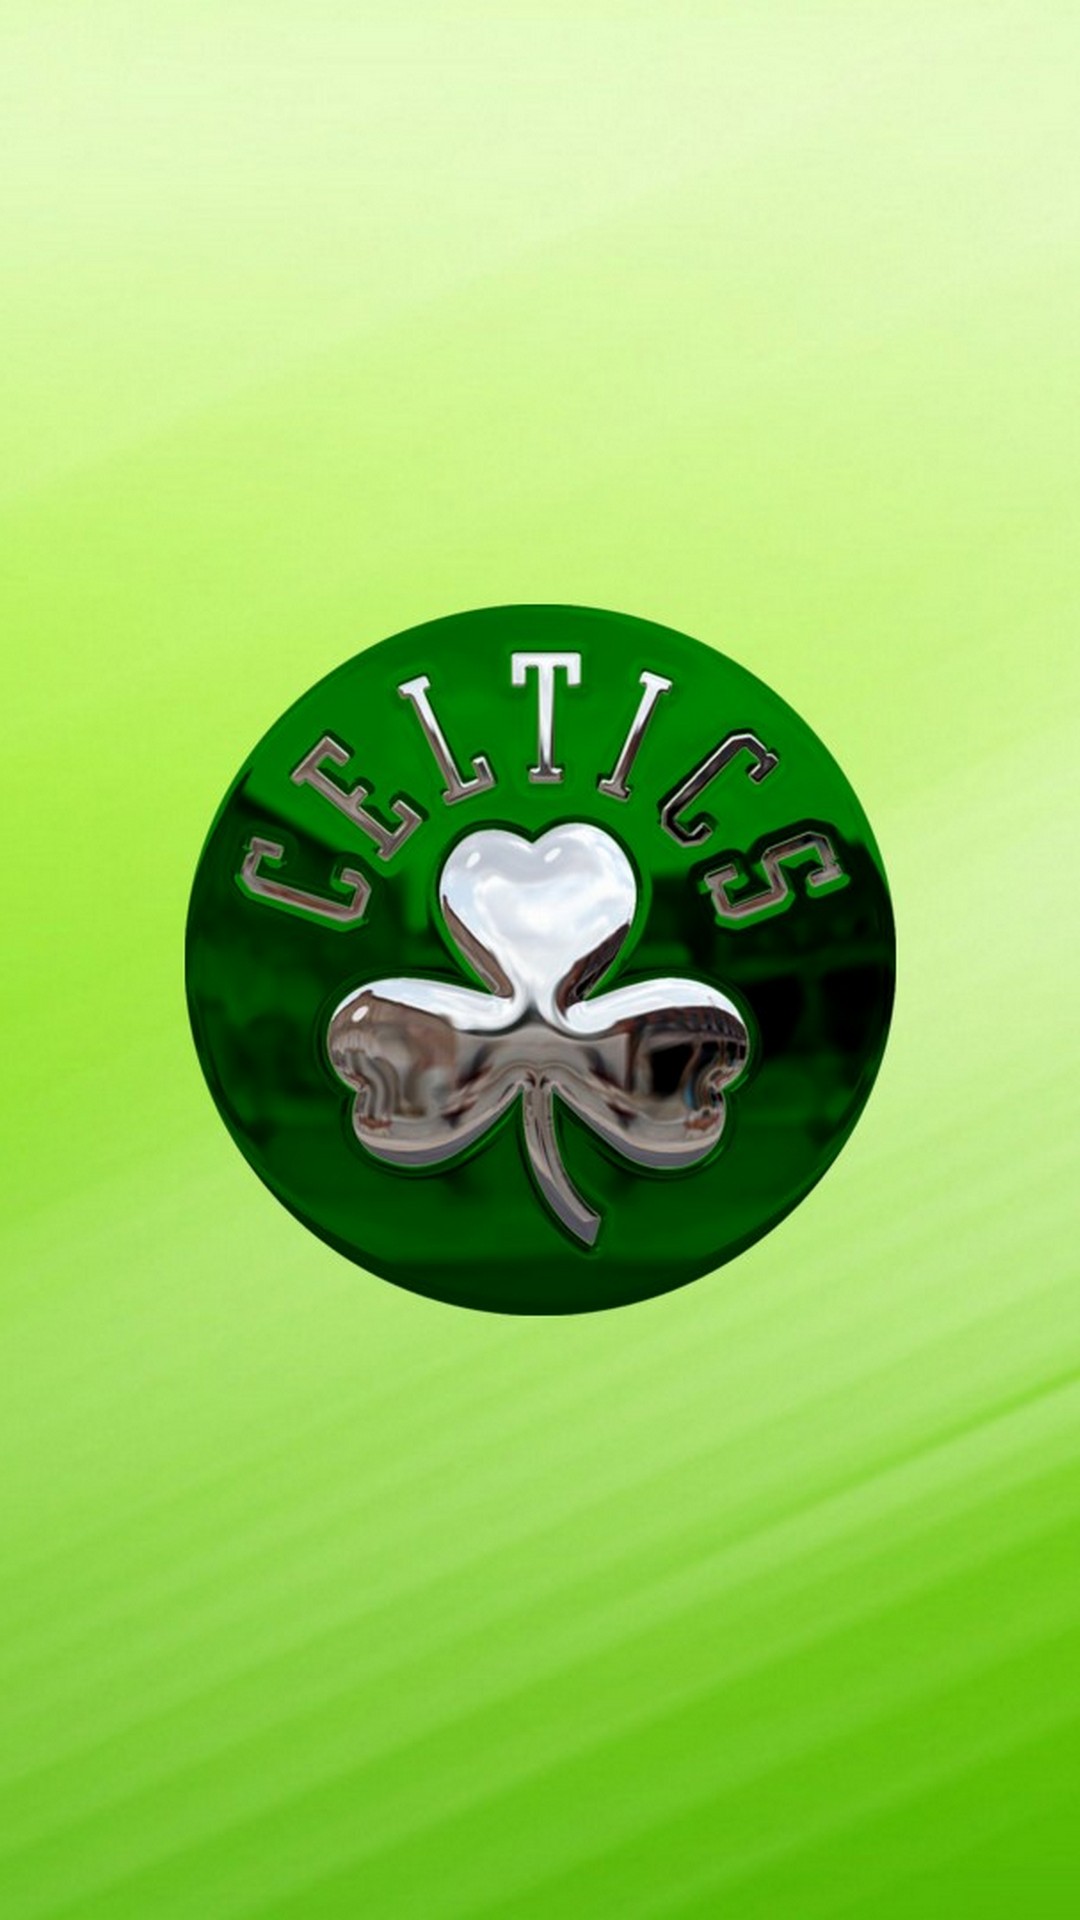 Boston Celtics HD Wallpapers For Android with image resolution 1080x1920 pixel. You can make this wallpaper for your Android backgrounds, Tablet, Smartphones Screensavers and Mobile Phone Lock Screen